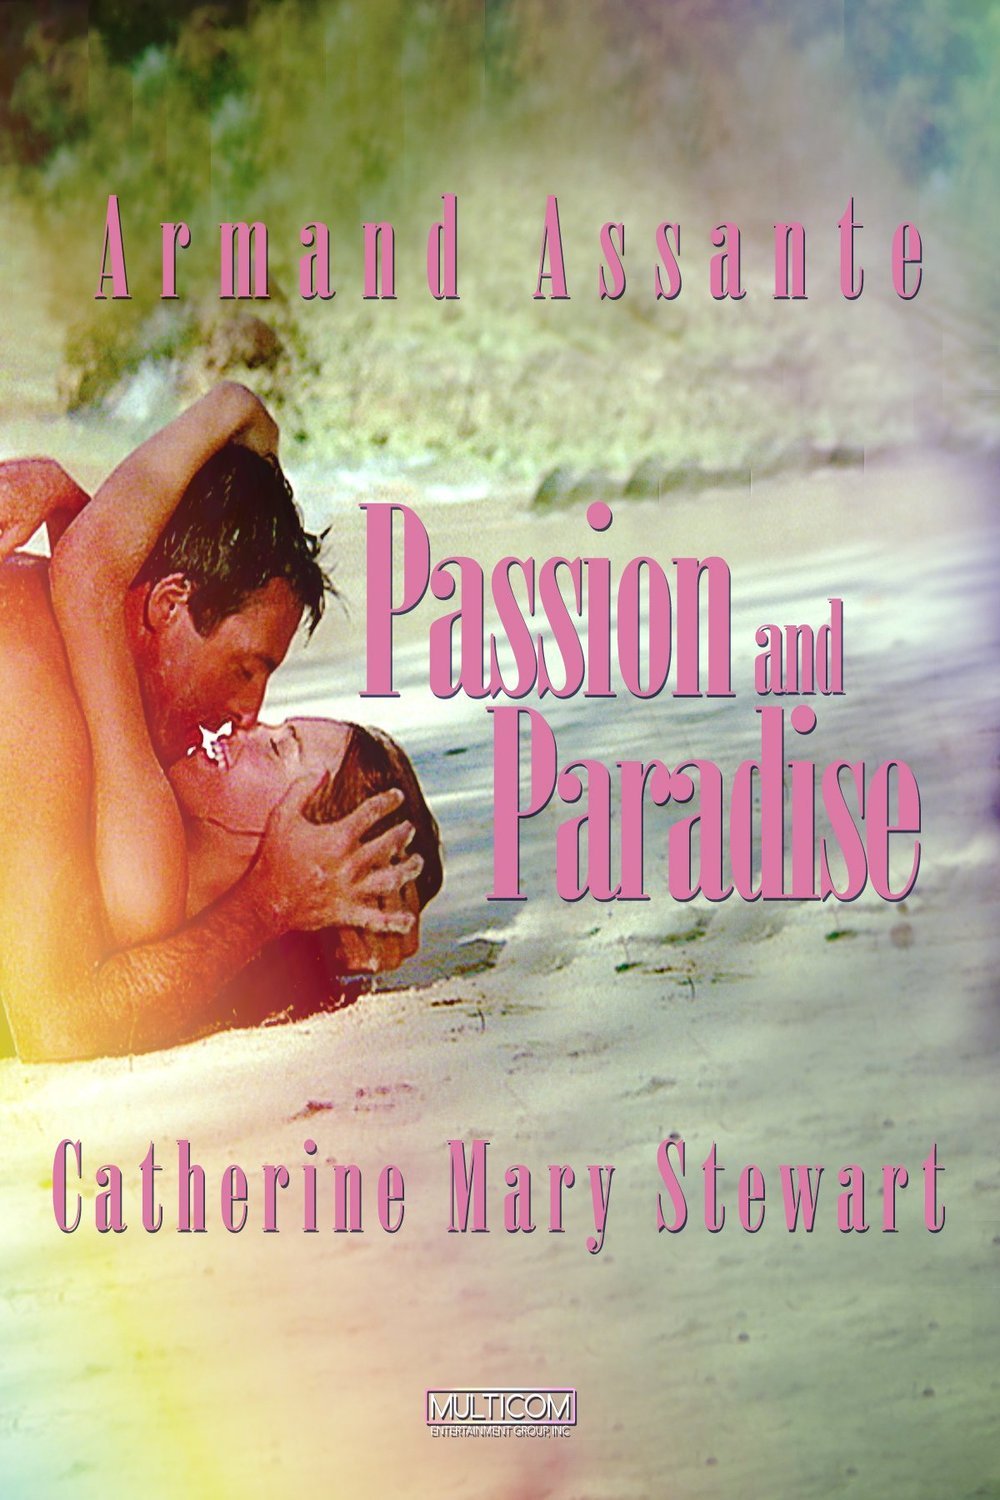 Poster of the movie Passion and Paradise